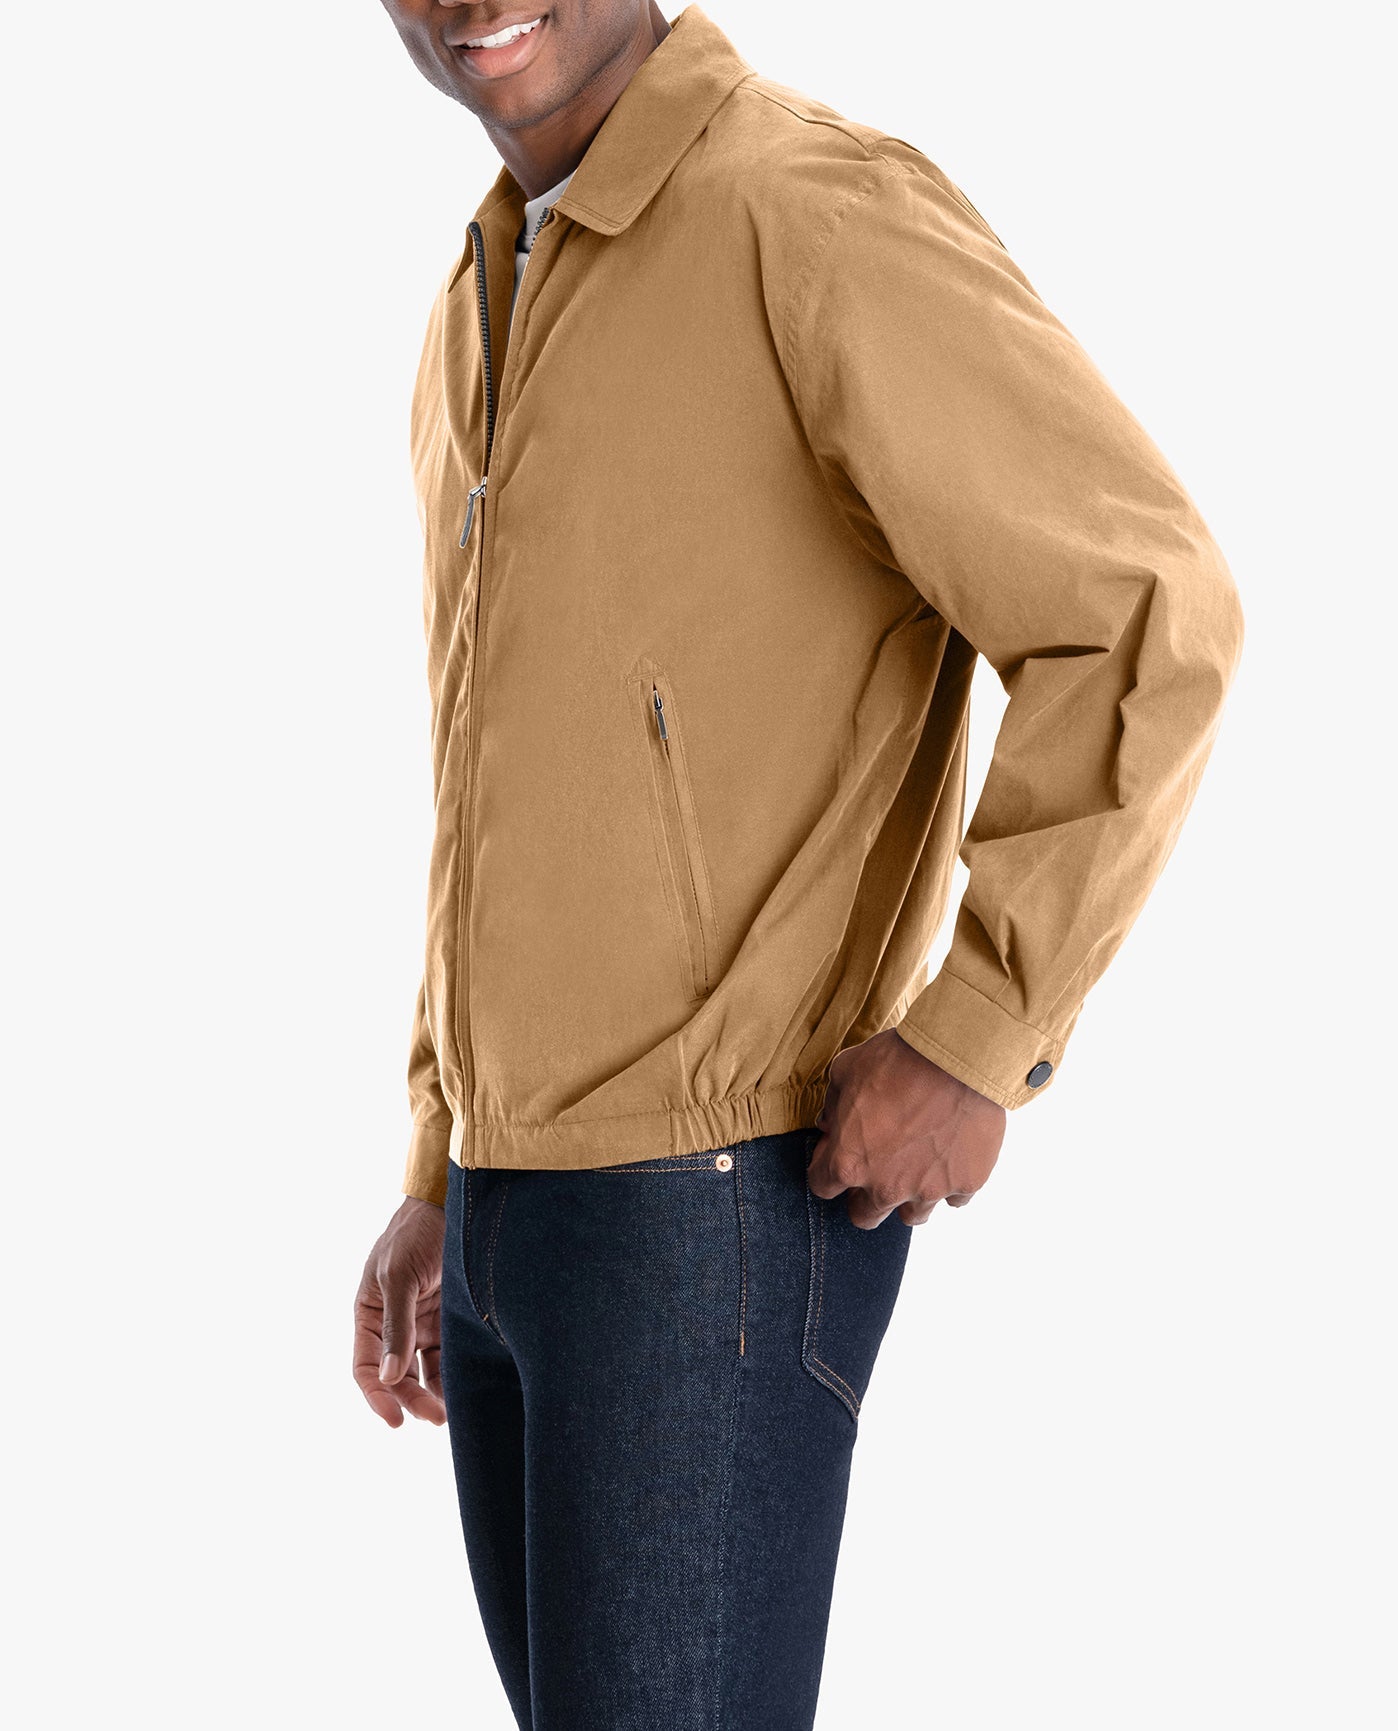 BACK VIEW OF TALL LIGHT WEIGHT ZIP FRONT GOLF JACKET | CAMEL